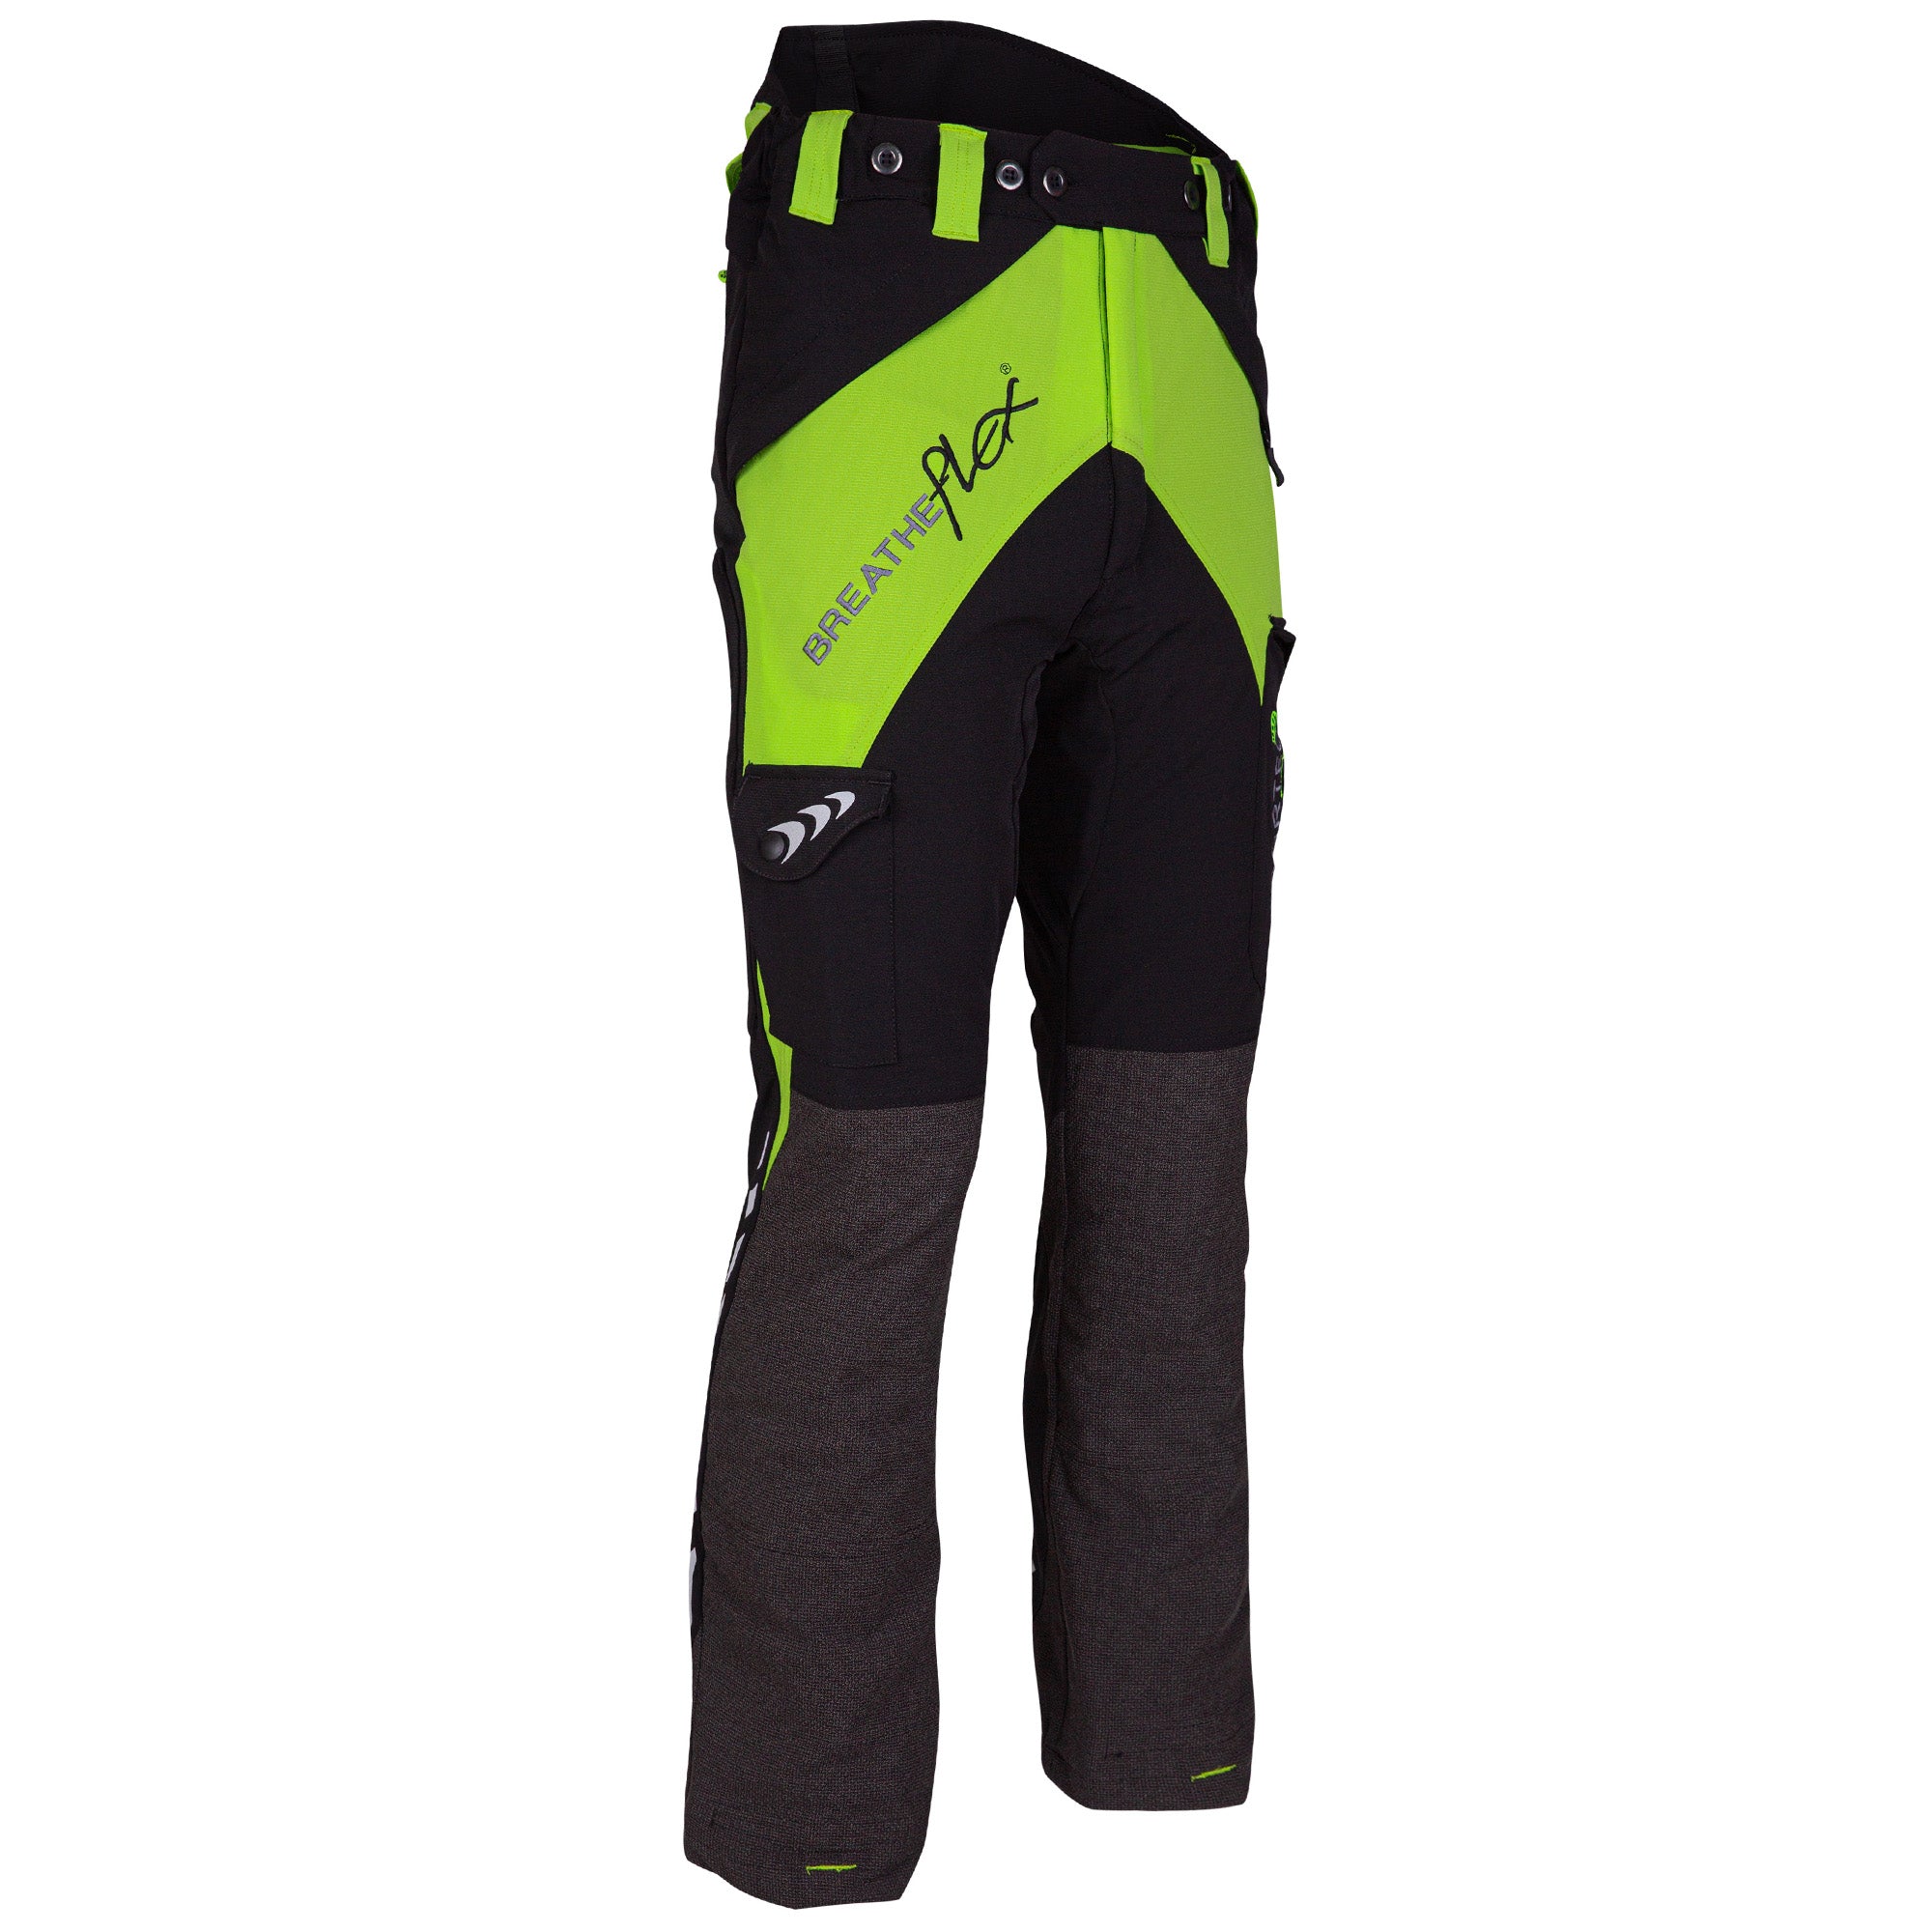 AT4050 - Trouser Breatheflex Lime Type C/Class 1